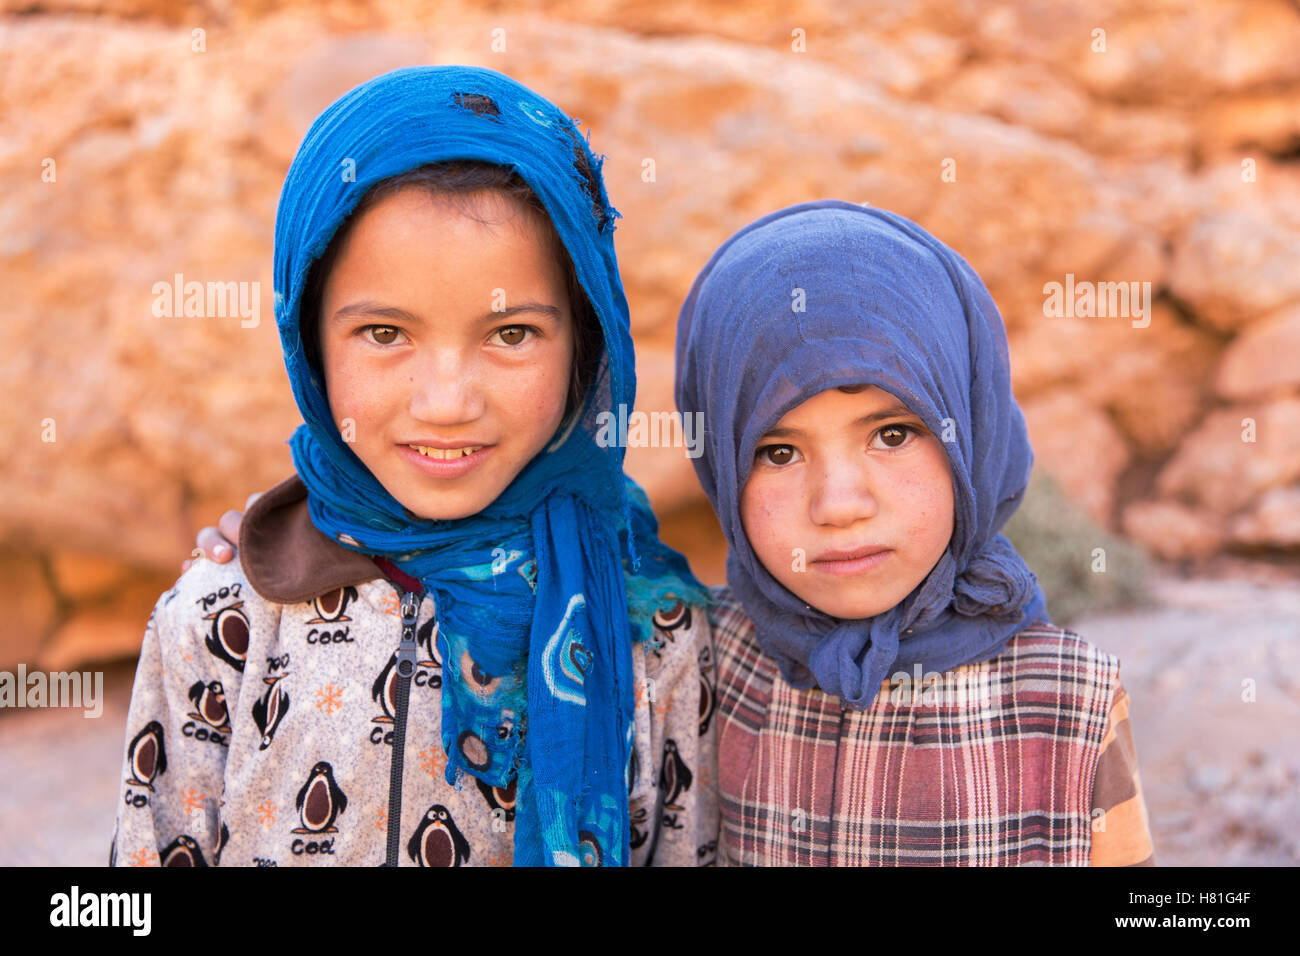 Morocco,Todra Gorge, portrait of two nomad children Stock Photo